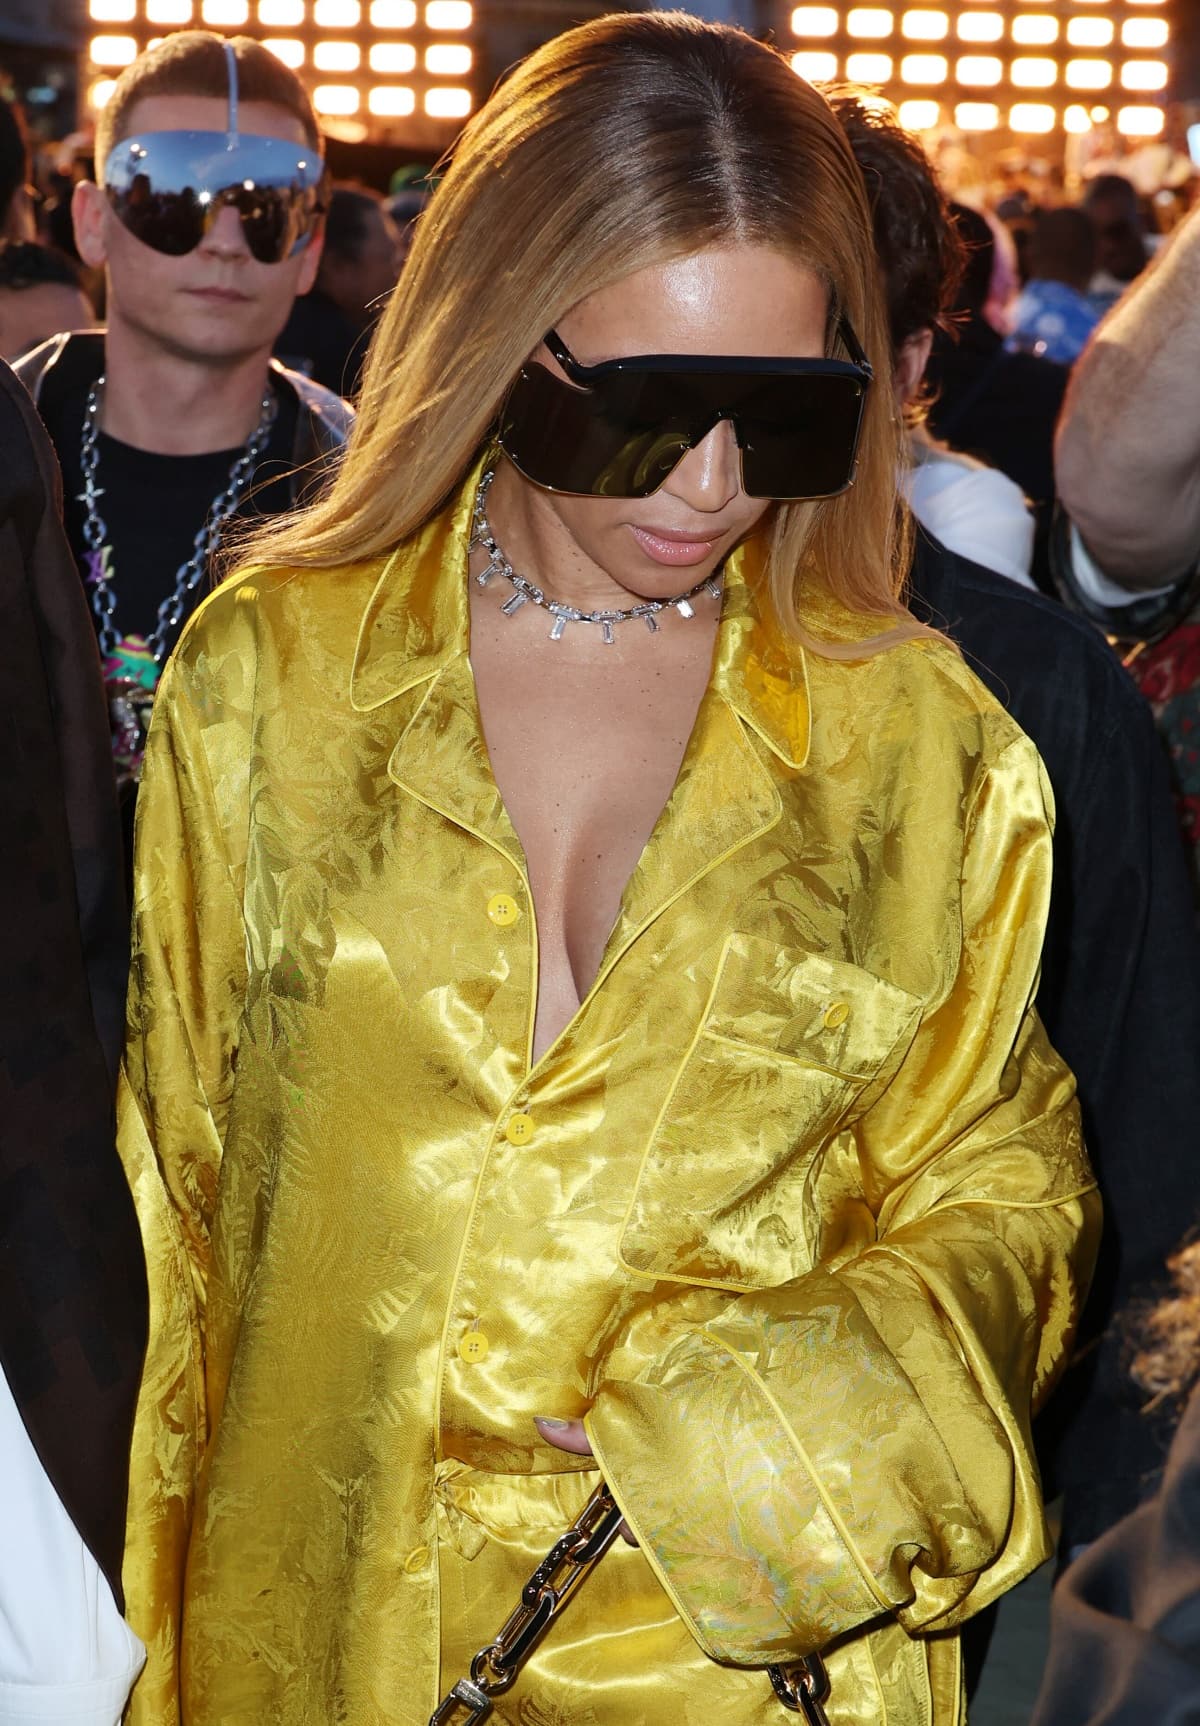 Beyonce wearing a custom golden pajama set from Louis Vuitton accessorized with oversized shield sunglasses, a diamond choker, and a Tiffany & Co. ring